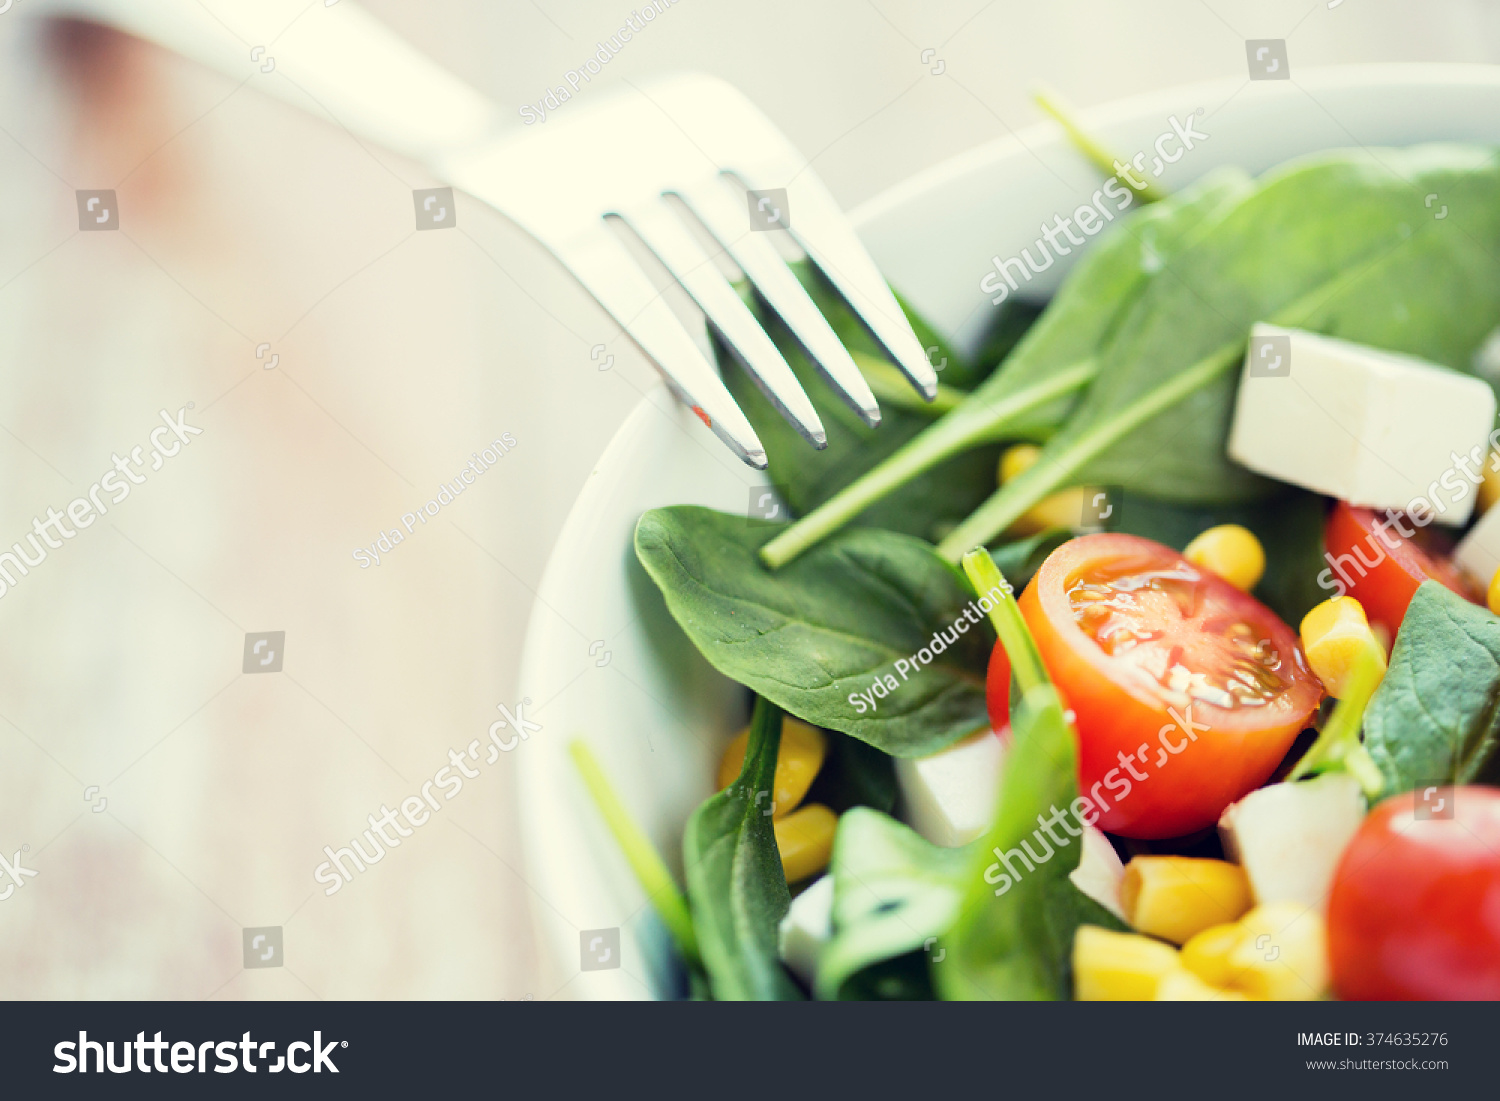 healthy eating, dieting, vegetarian kitchen and cooking concept - close up of vegetable salad bowl and fork at home #374635276